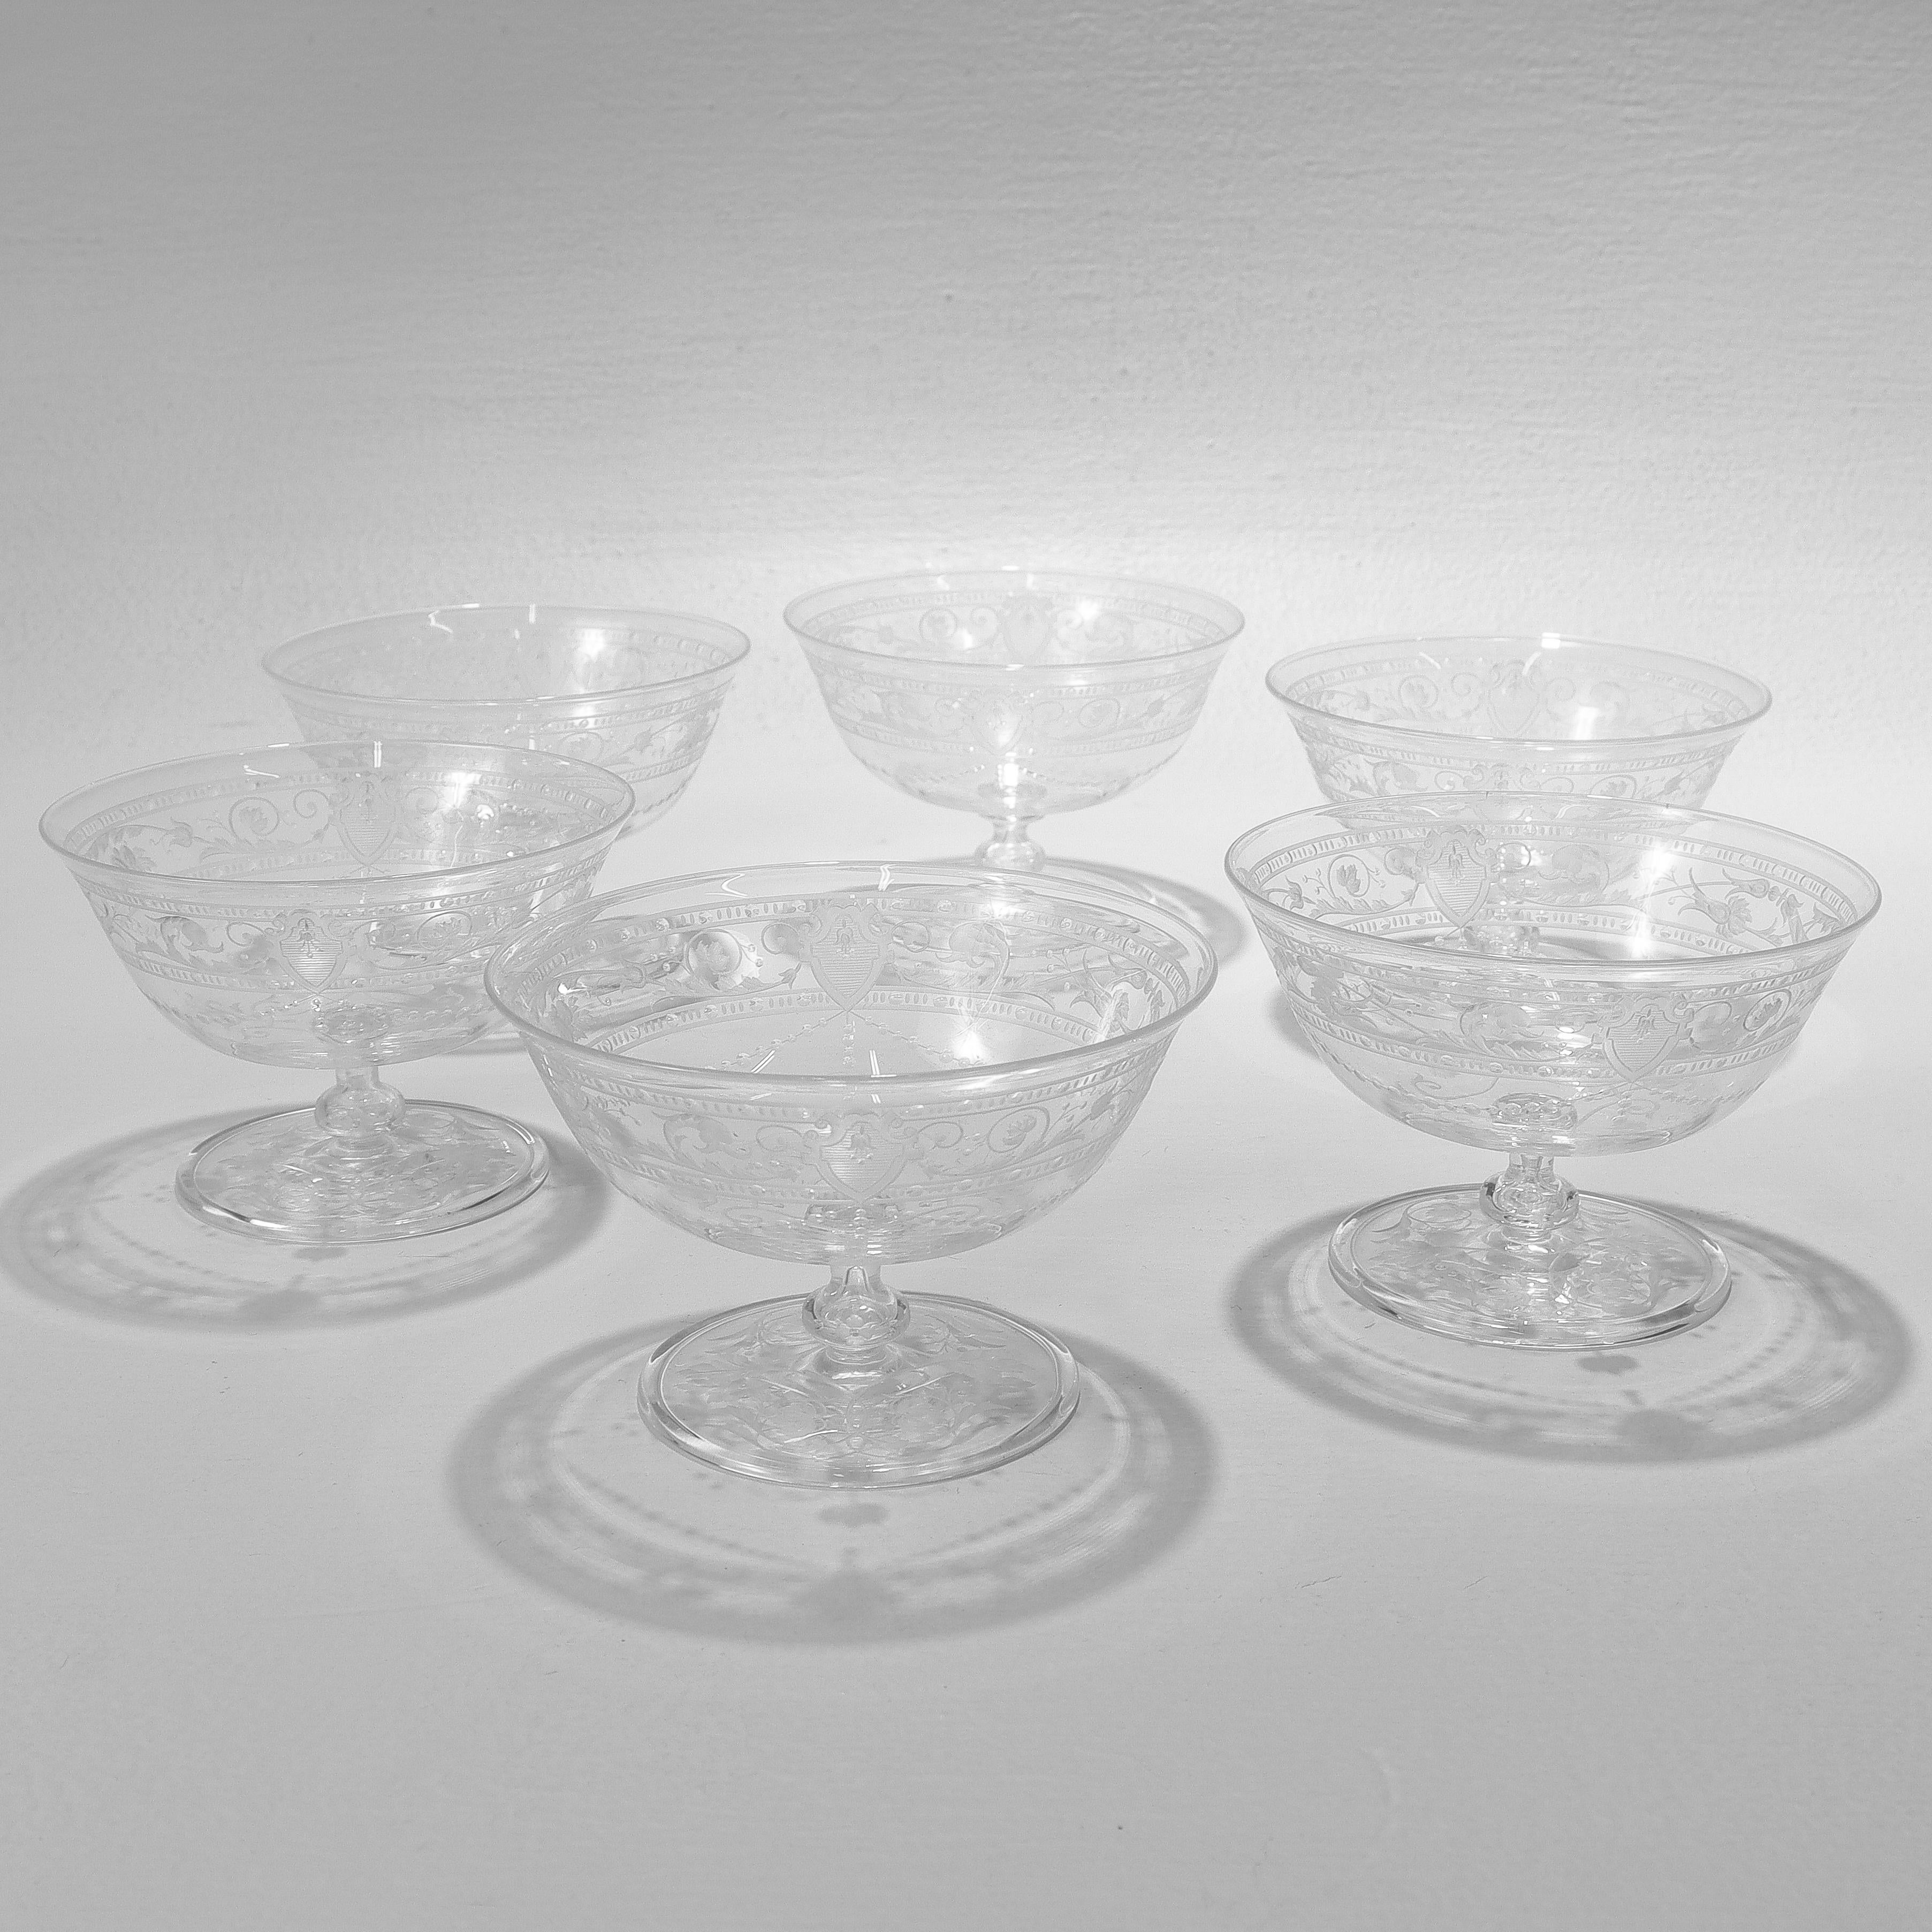 Set of 6 Antique Stourbridge Etched & Engraved Glass Sherbert Bowls In Good Condition For Sale In Philadelphia, PA